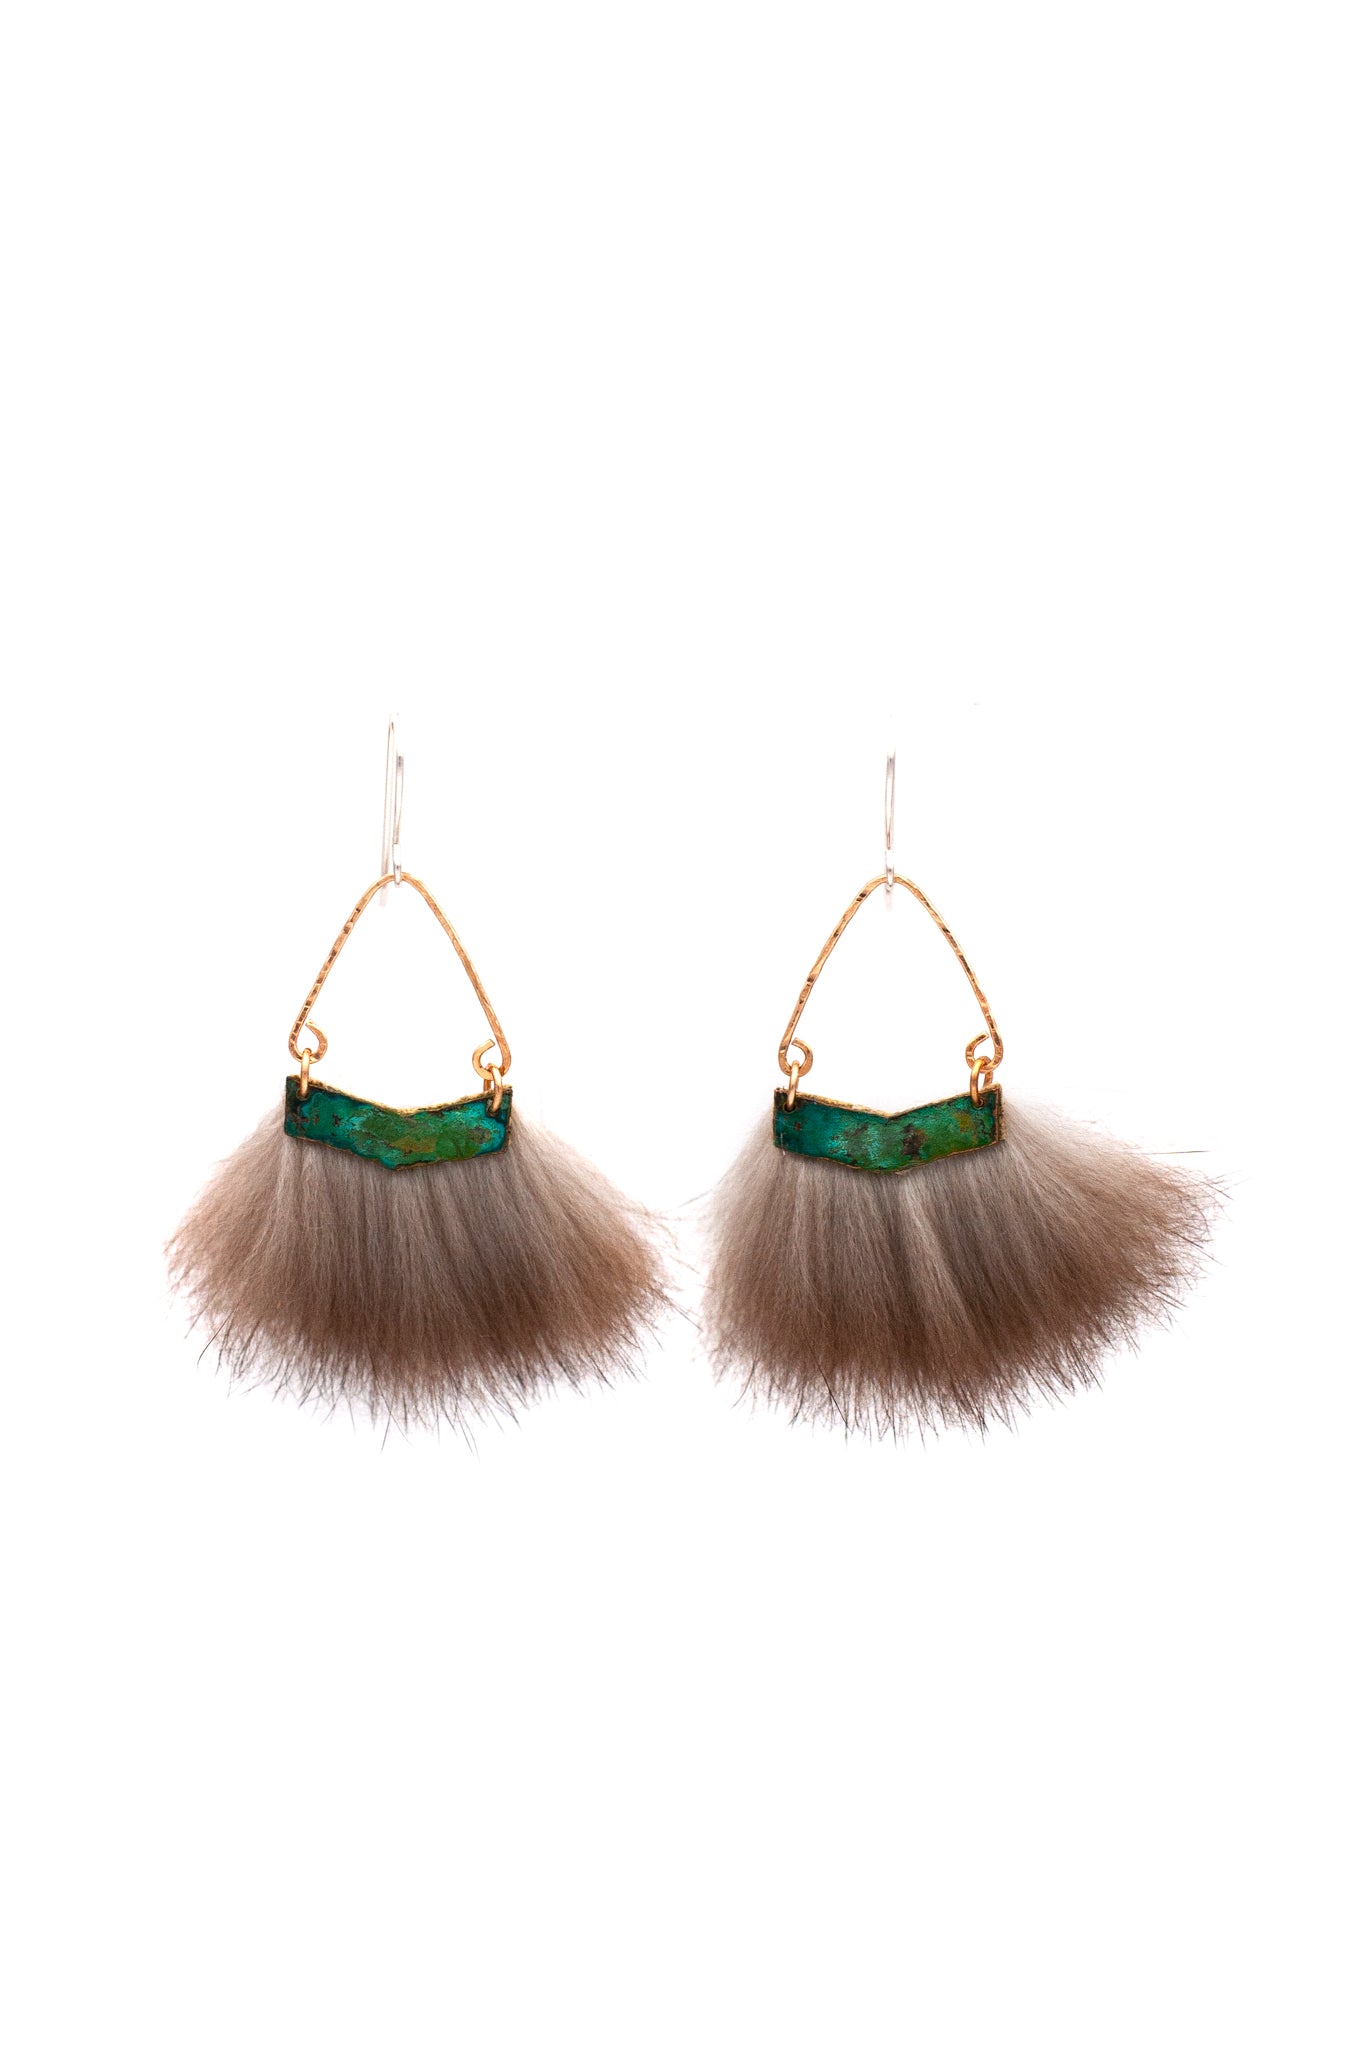 bold real fur earrings with hammered metal